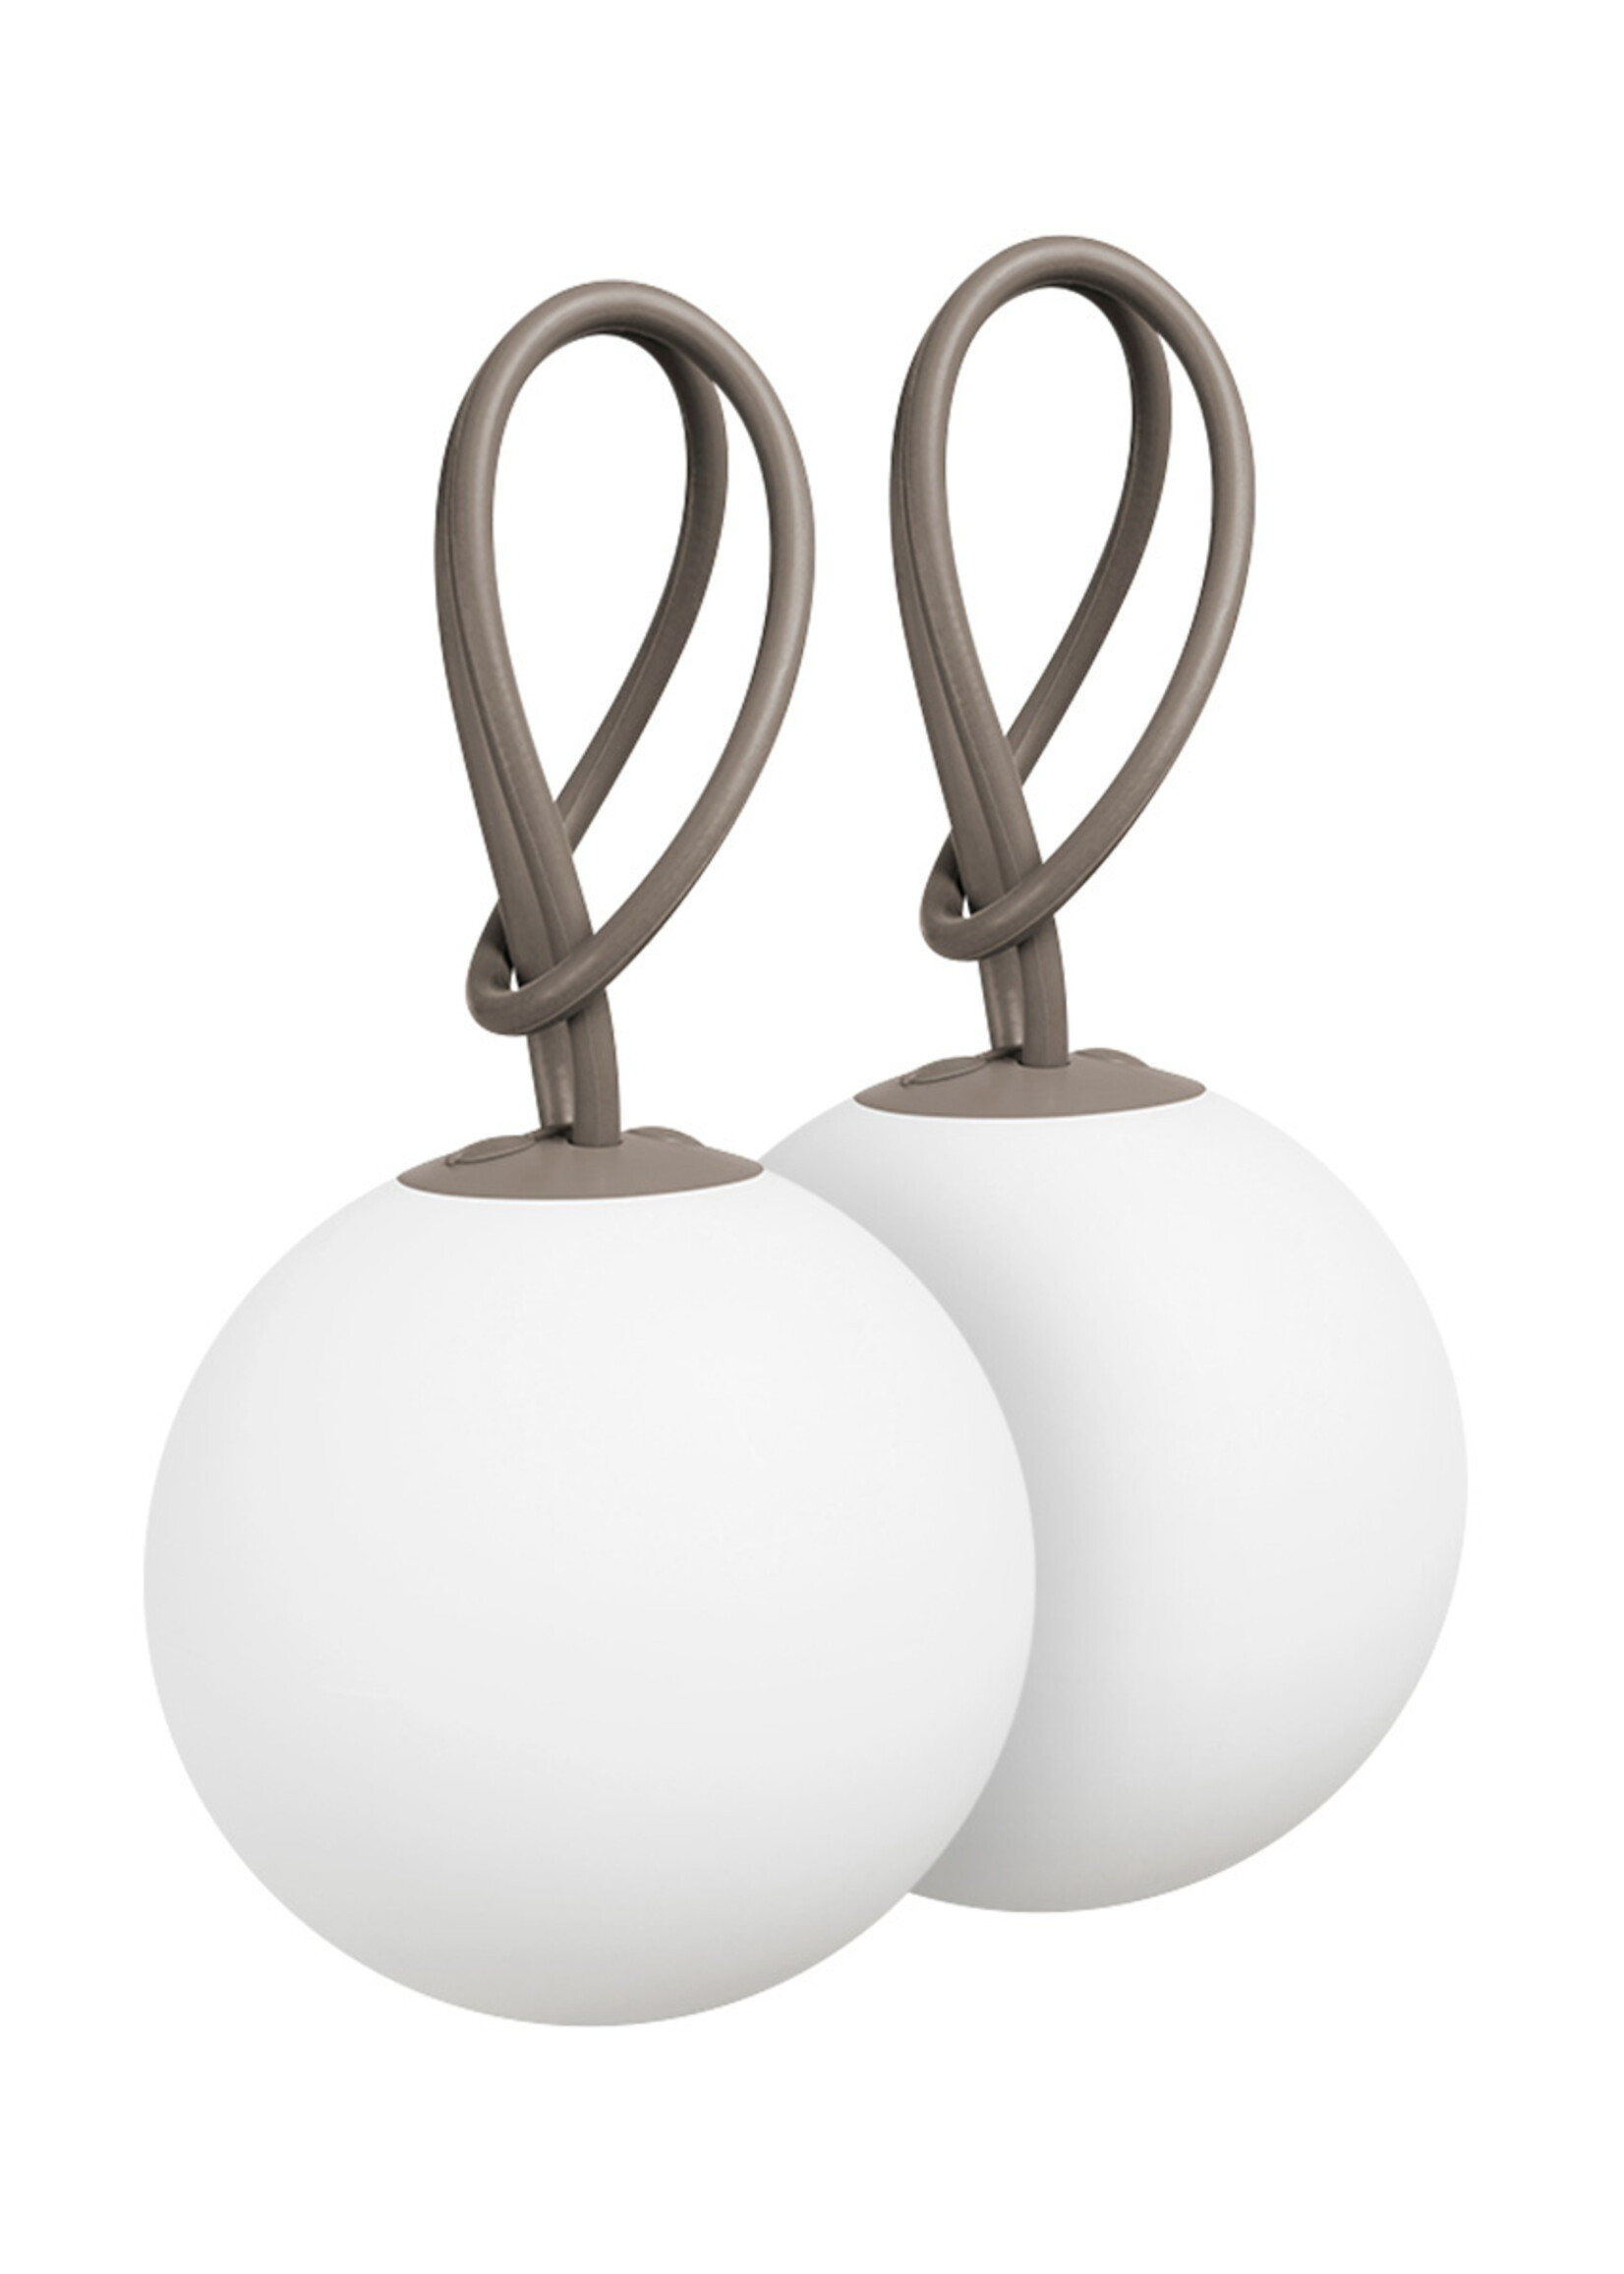 Fatboy Fatboy - Bolleke - Lot de 2 - Lampe suspendue - Rechargeable - Taupe - Duo pack